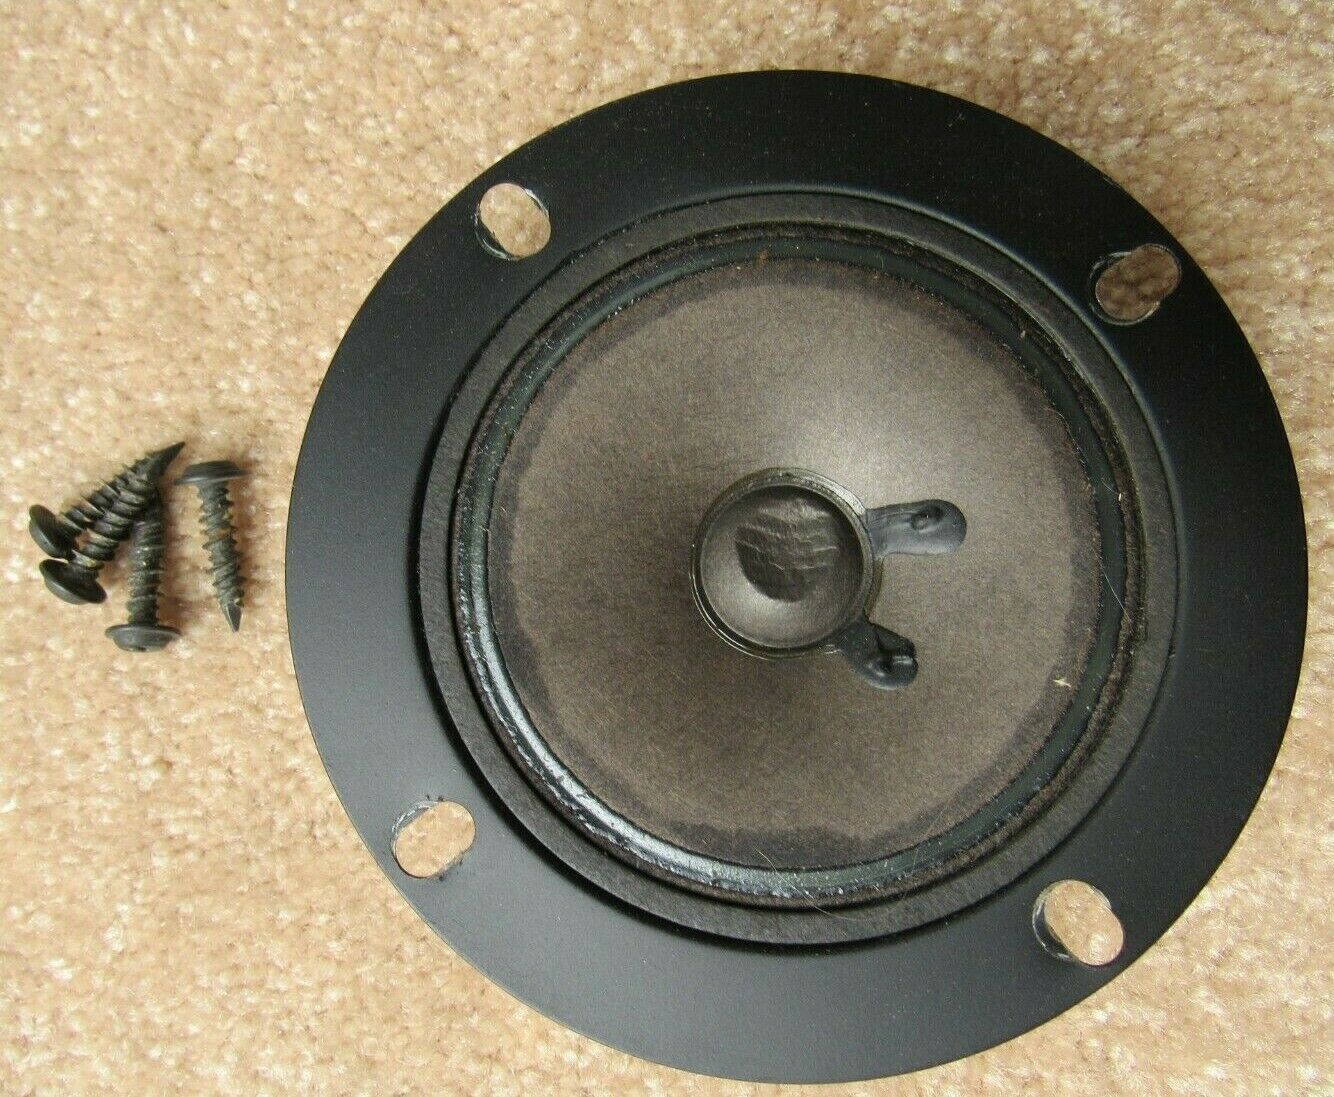 Fisher Sa-80427 Tweeter From Sr-310 Original 4 Inch Speaker Replacement Part